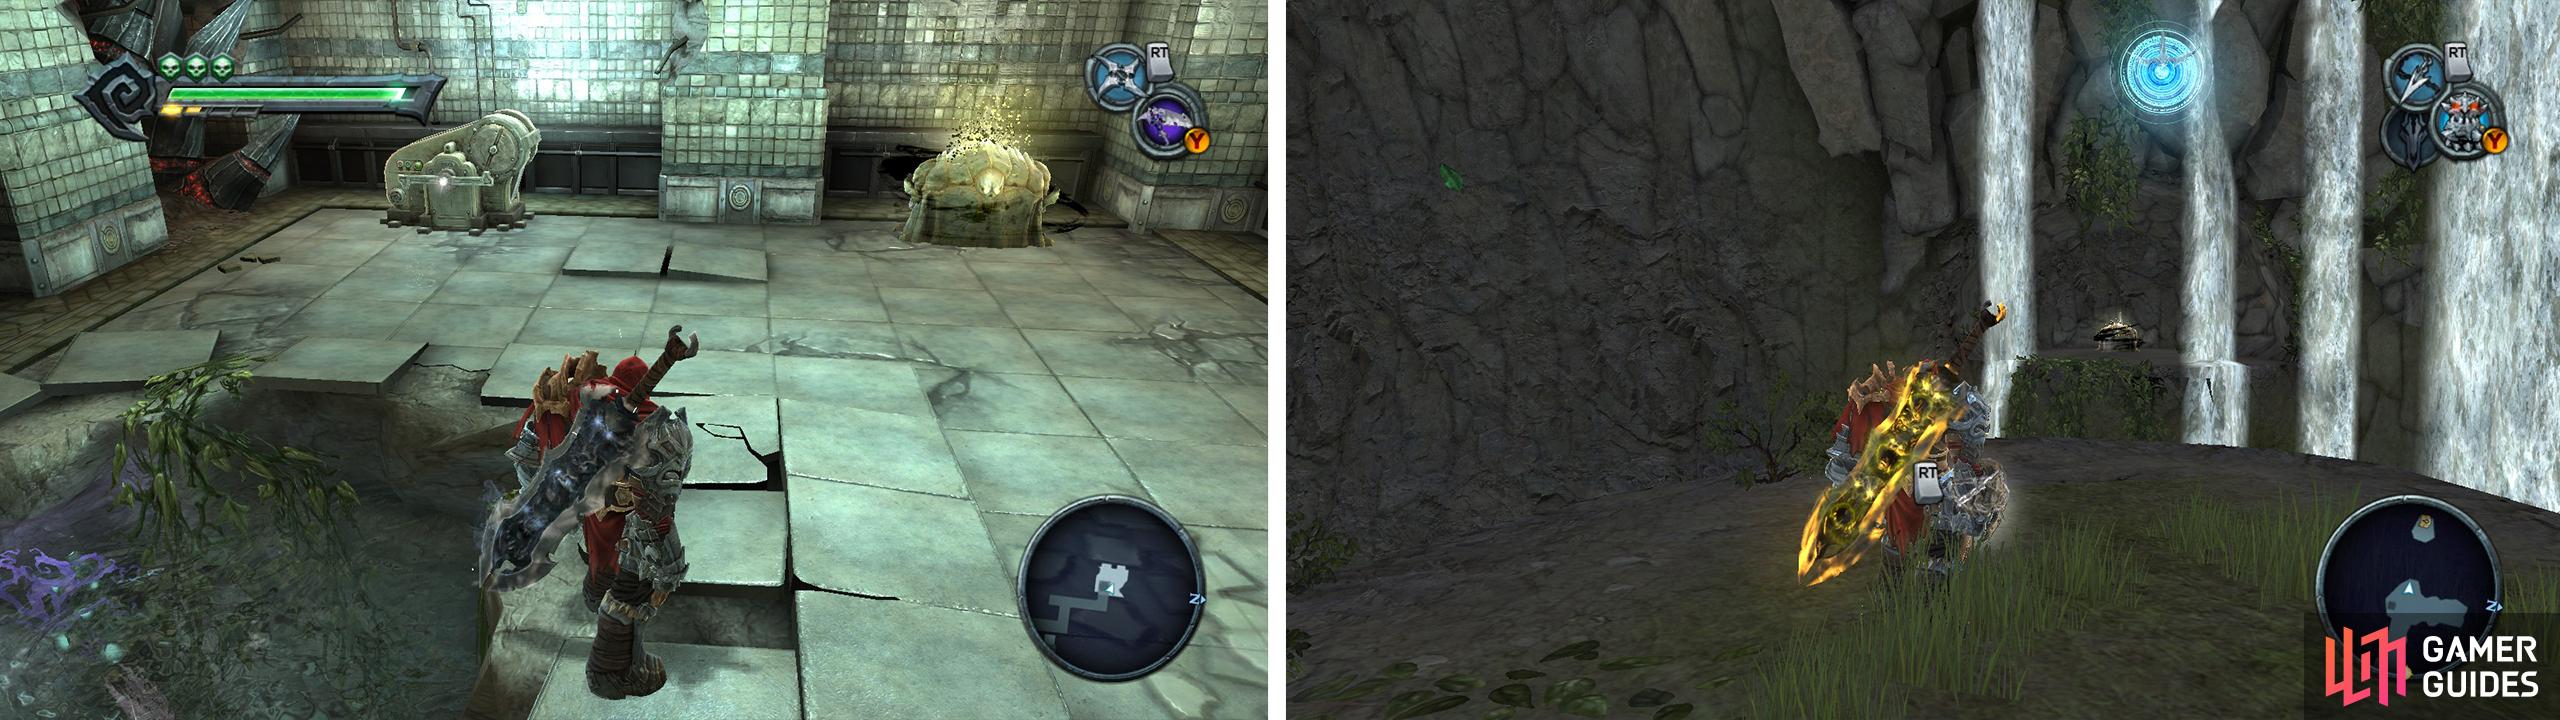 The Hollows: by the switch to turn off the fan in the underwater tunnels (left). Anvils Ford: on a small floating island on the west side of the map (right) youll need the Abyssal Chain to reach it.